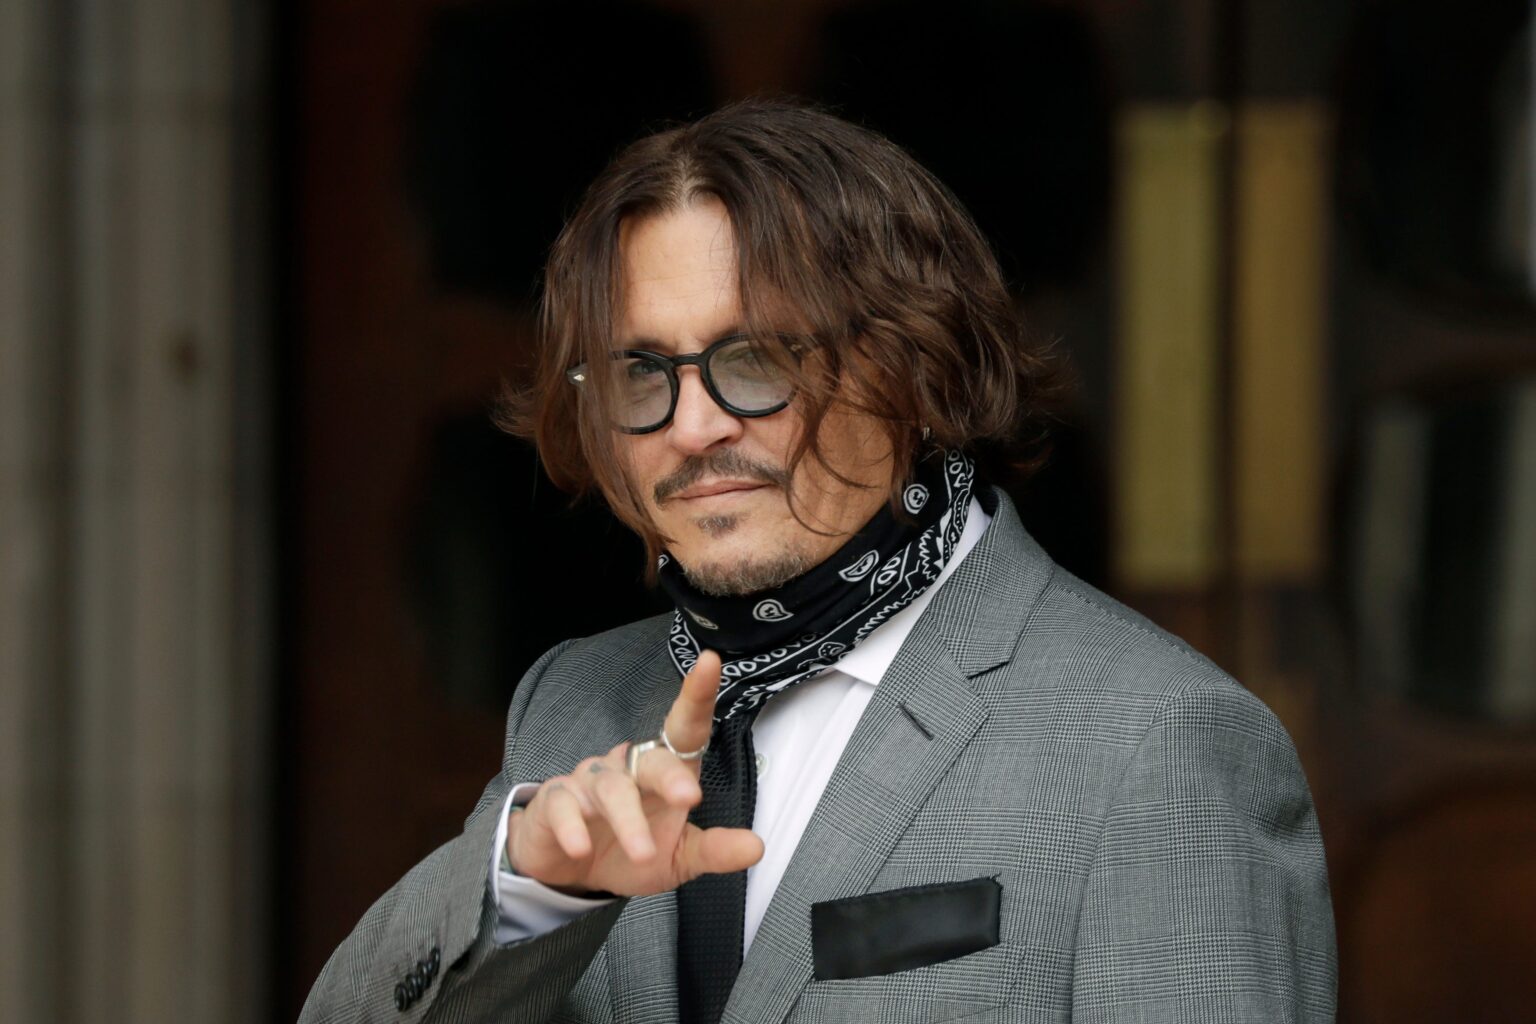 Johnny Depp was one of the biggest movie stars of the 90s. Travel back through time with us to check out some of the iconic actor's best roles.